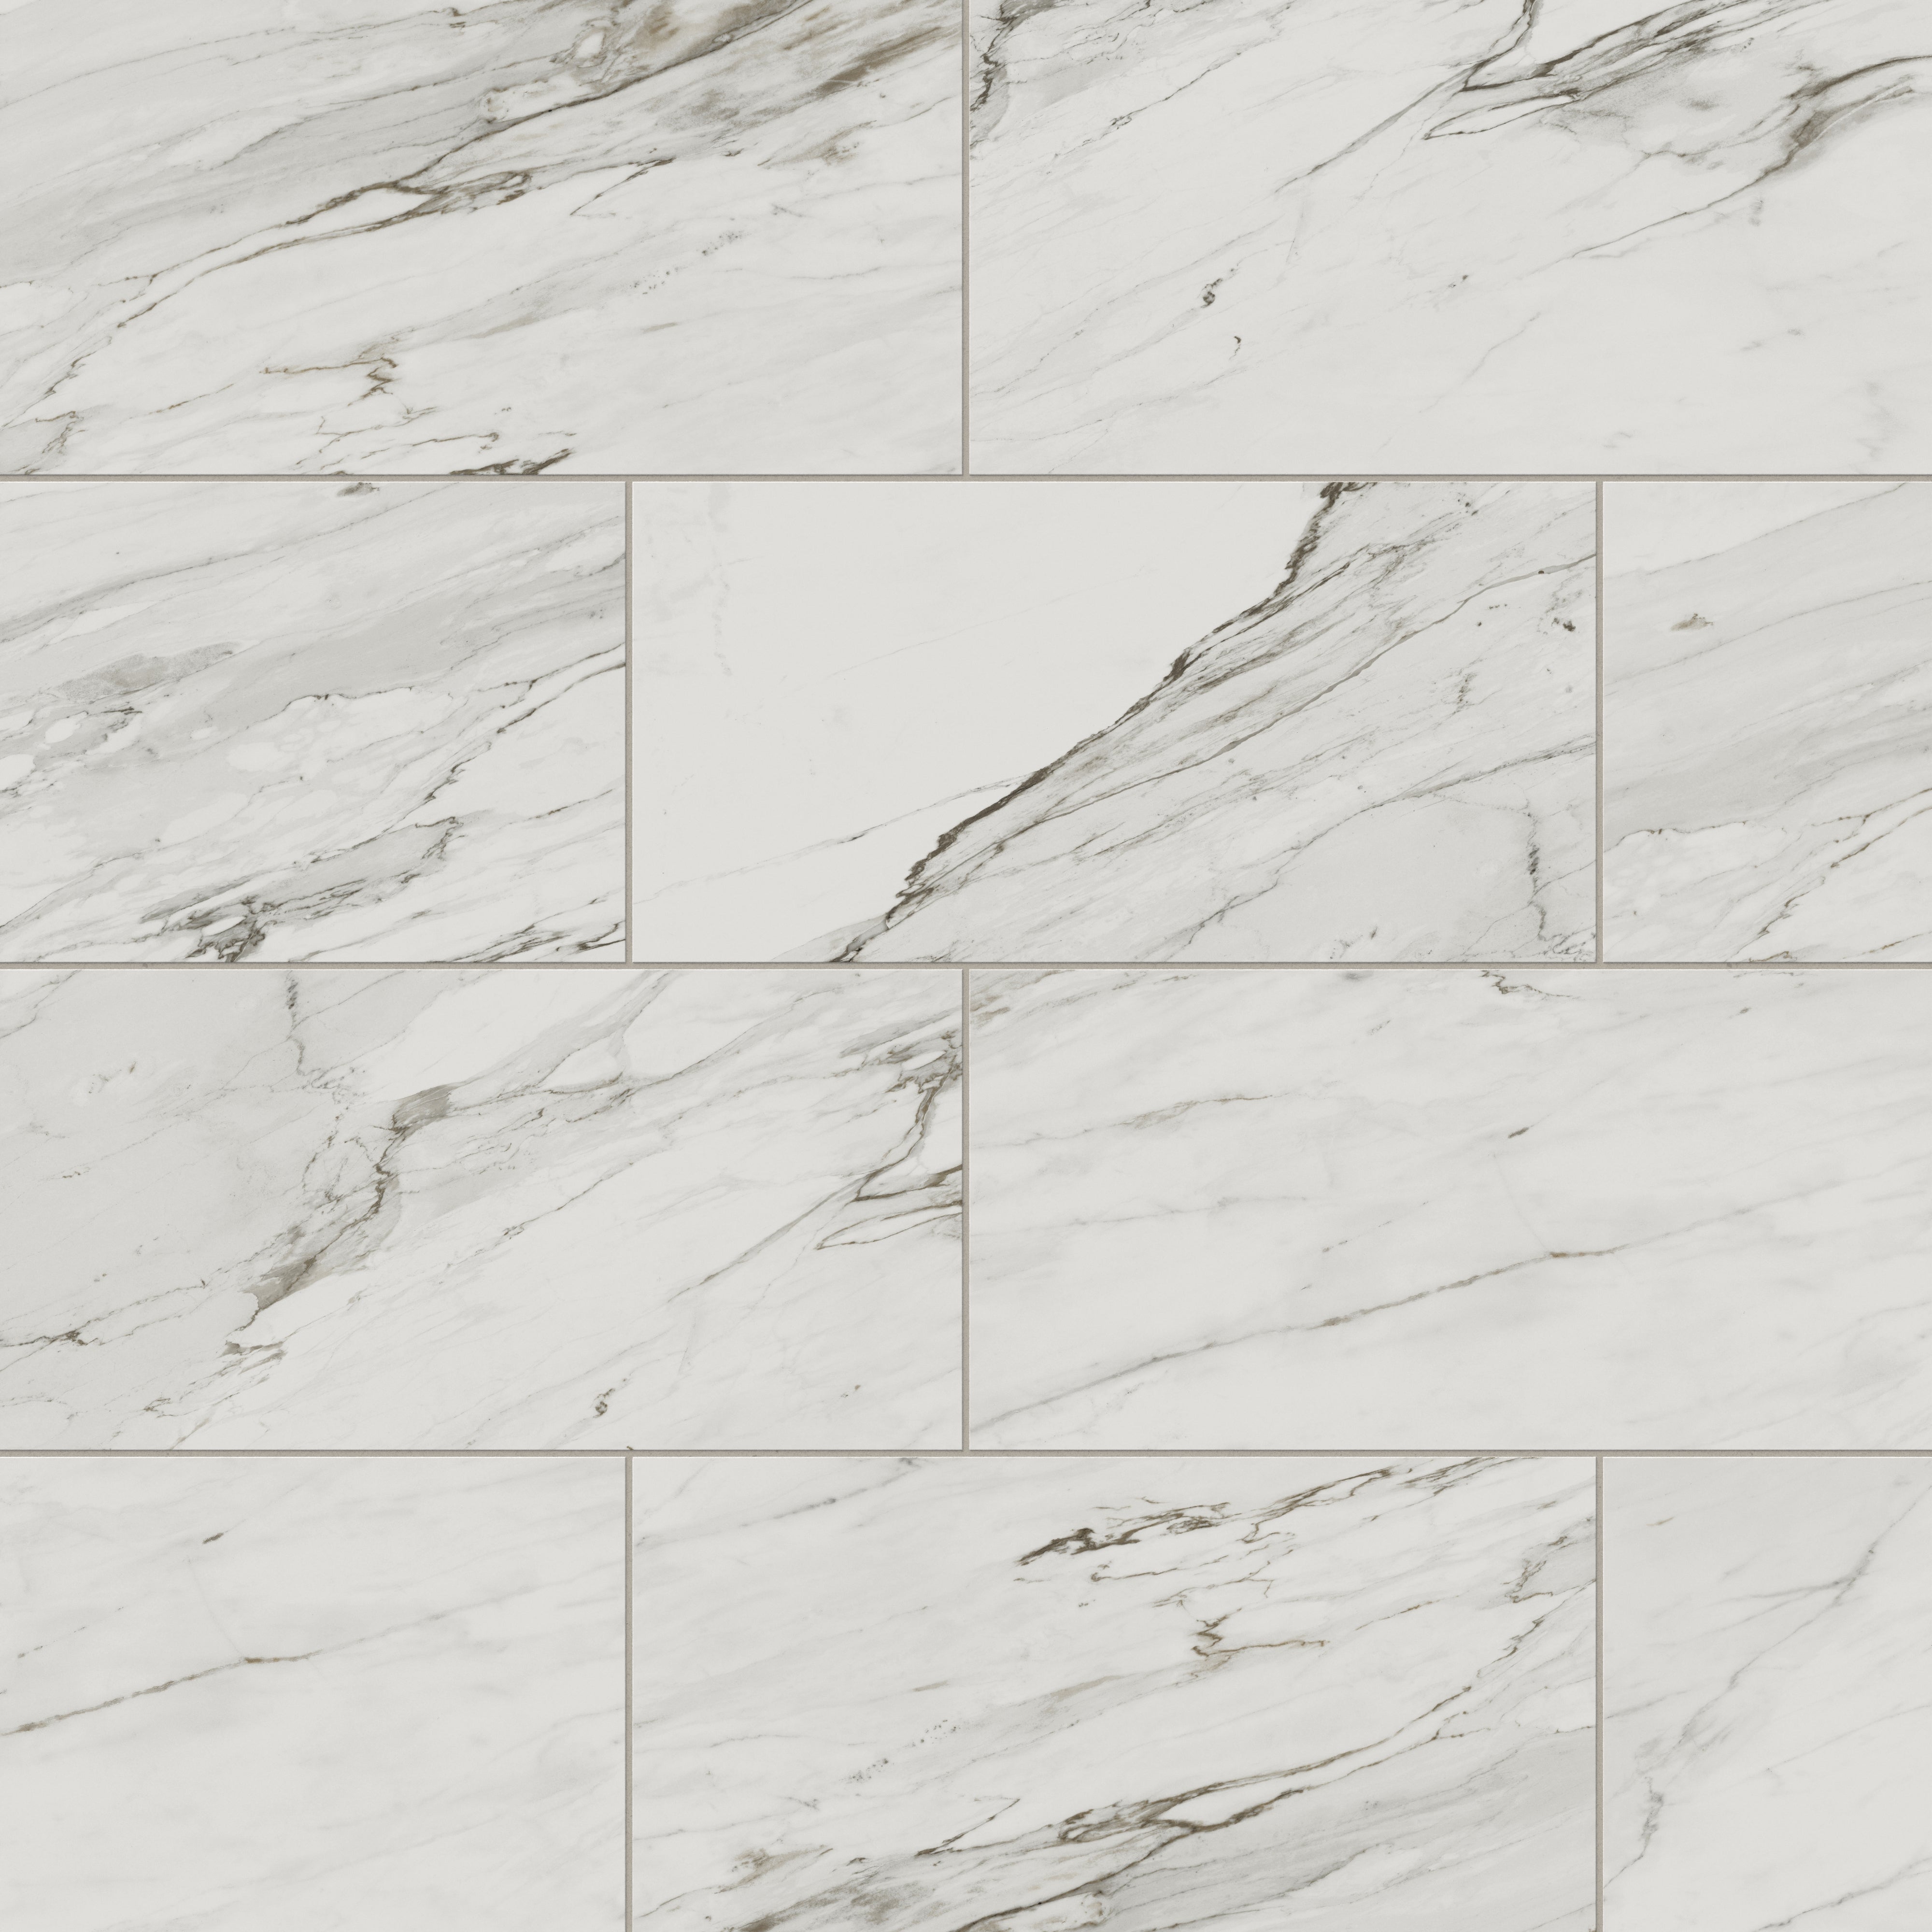 Chantel 12x24 Polished Porcelain Tile in Apuano